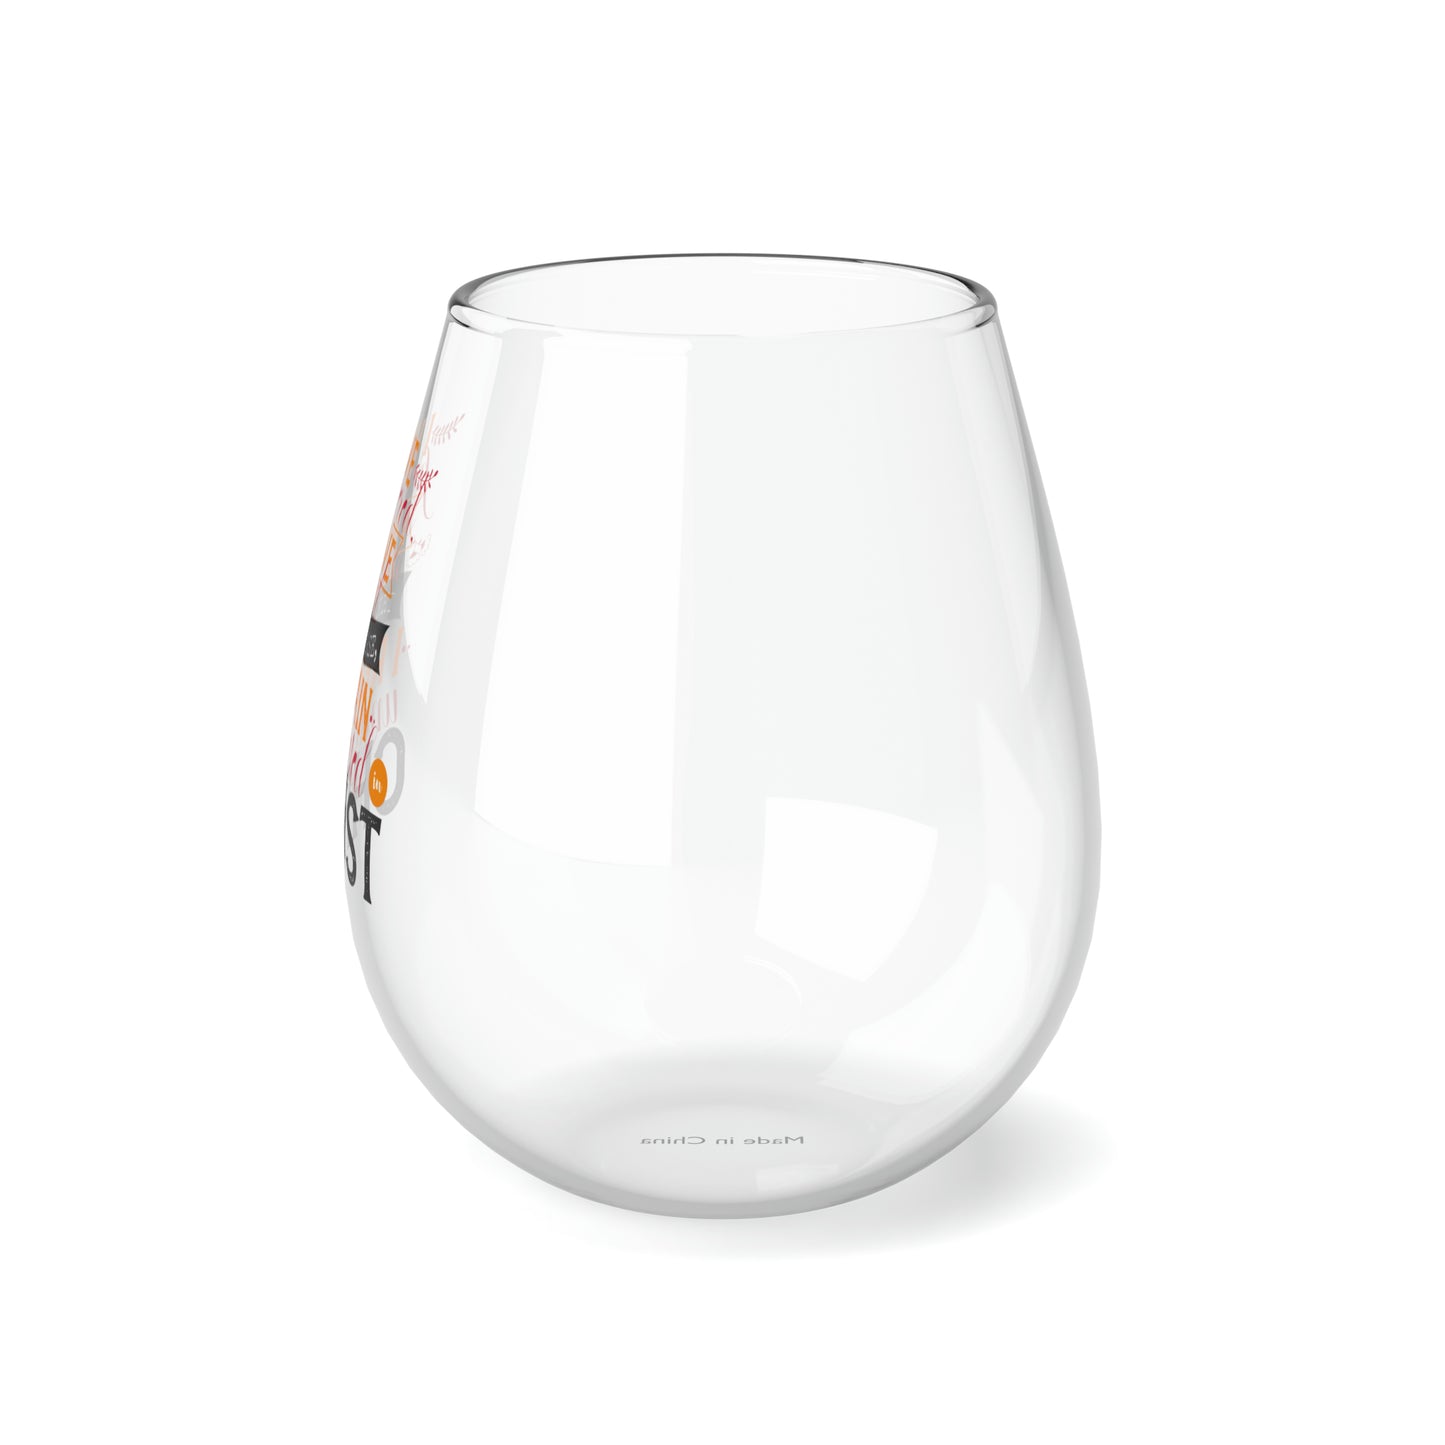 I Have Persevered I Have Stayed The Course I Remain Undefeated In Christ Stemless Wine Glass, 11.75oz